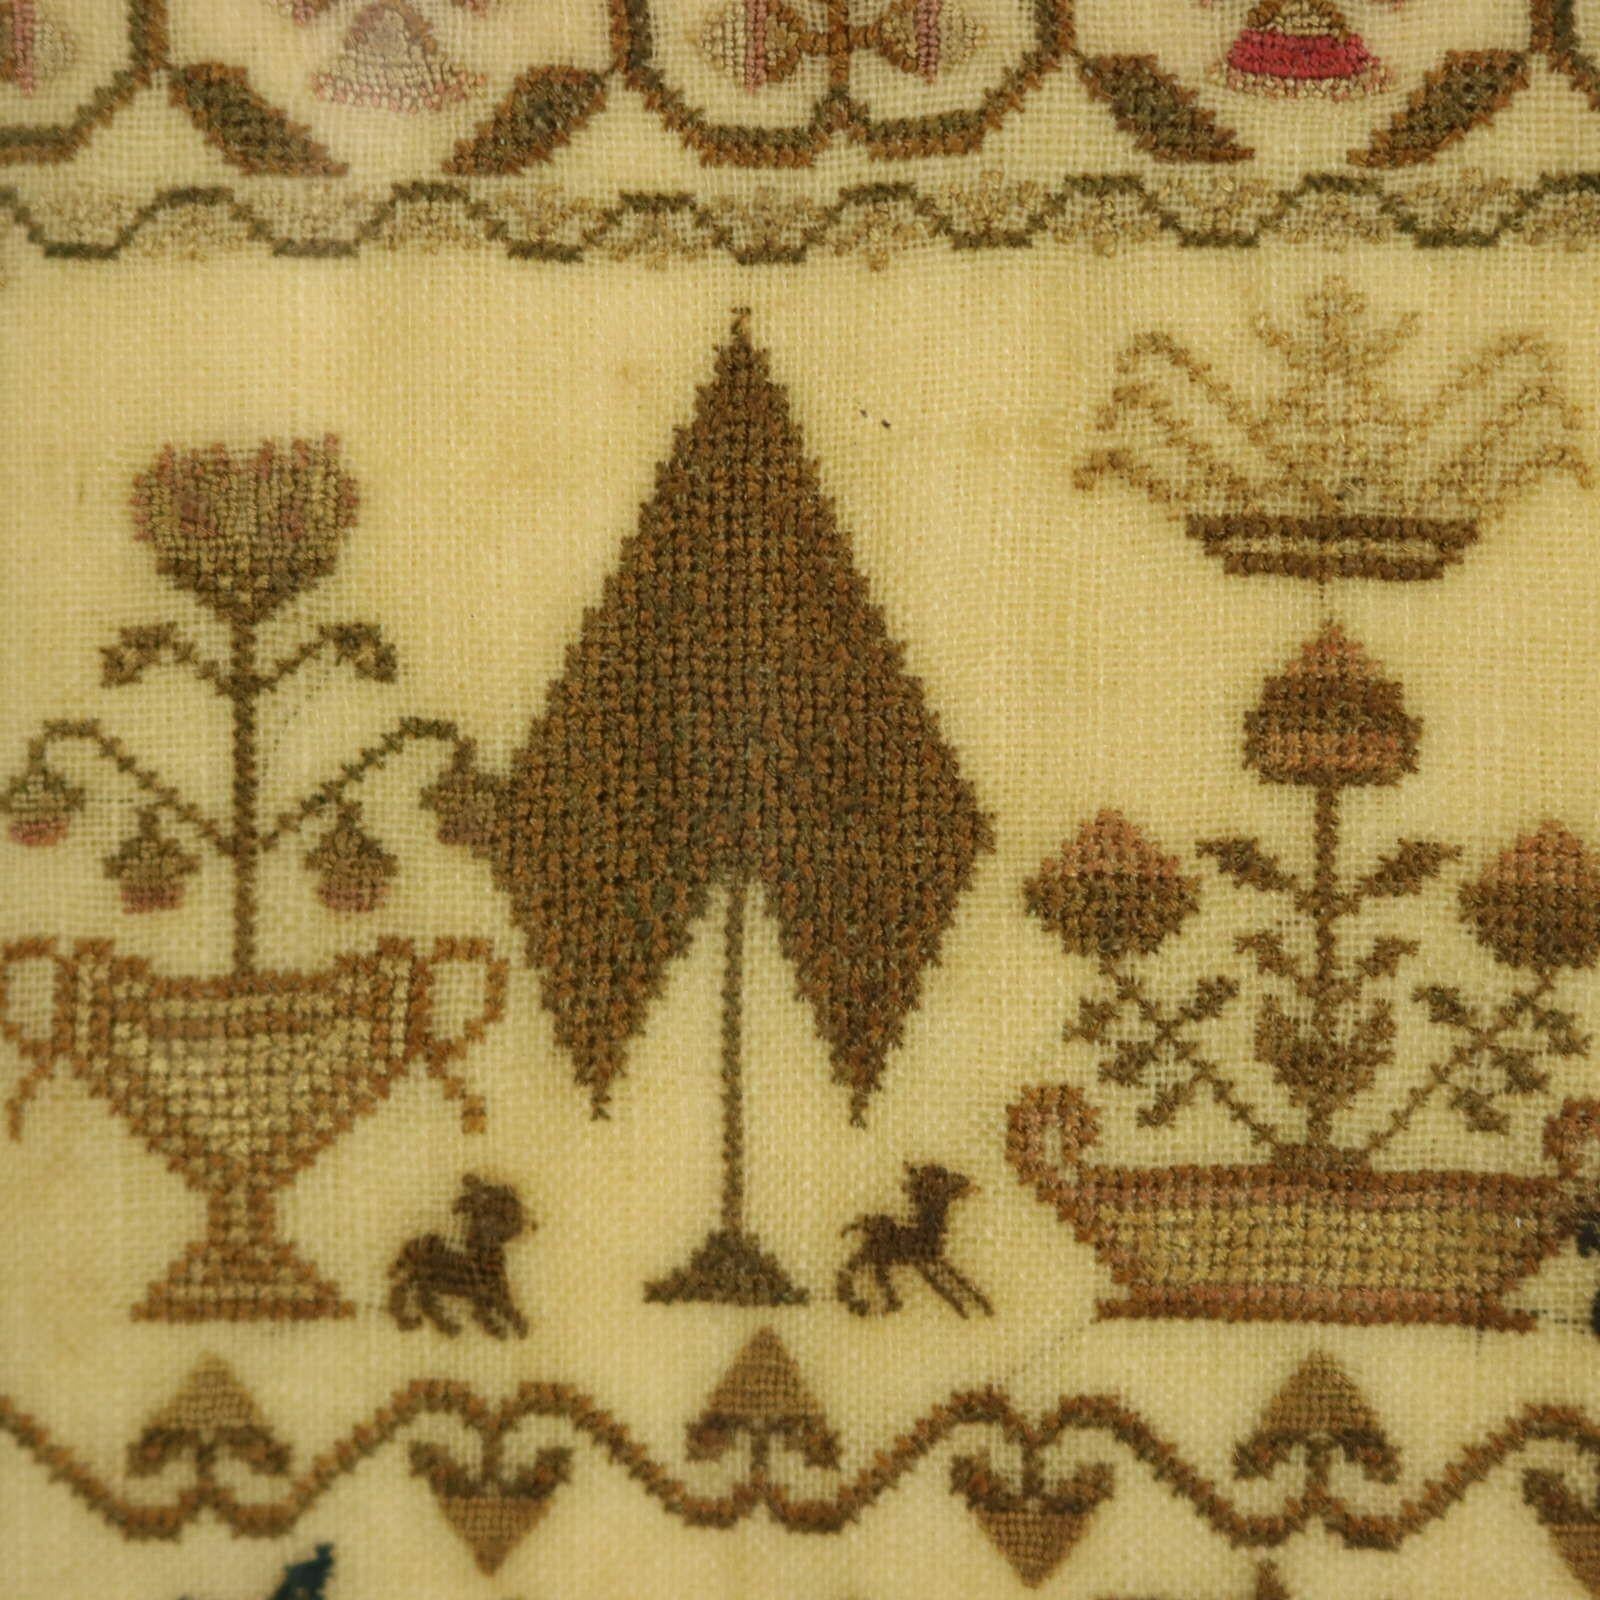 Antique Sampler, 1824, by Mary Richards aged 13 2